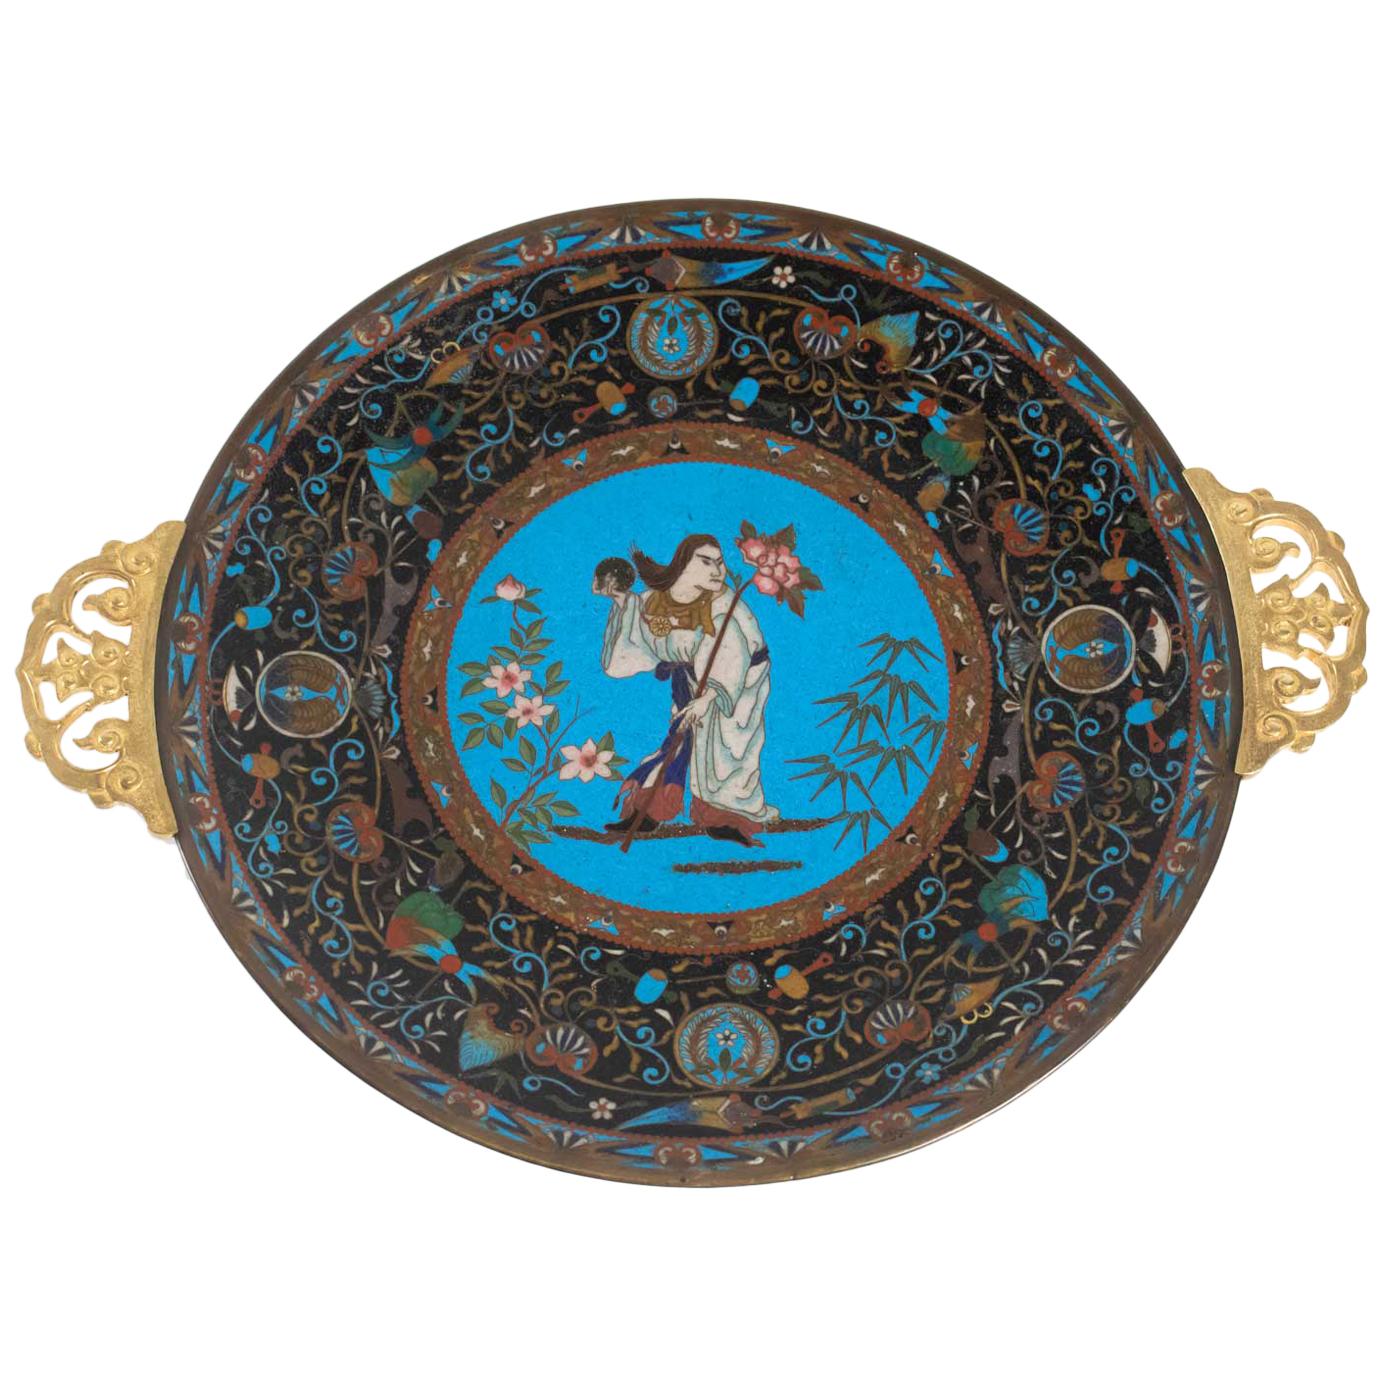 Polychrome Cloisonné Enameled Dish with Character Decor and Entrelcss Fleuris